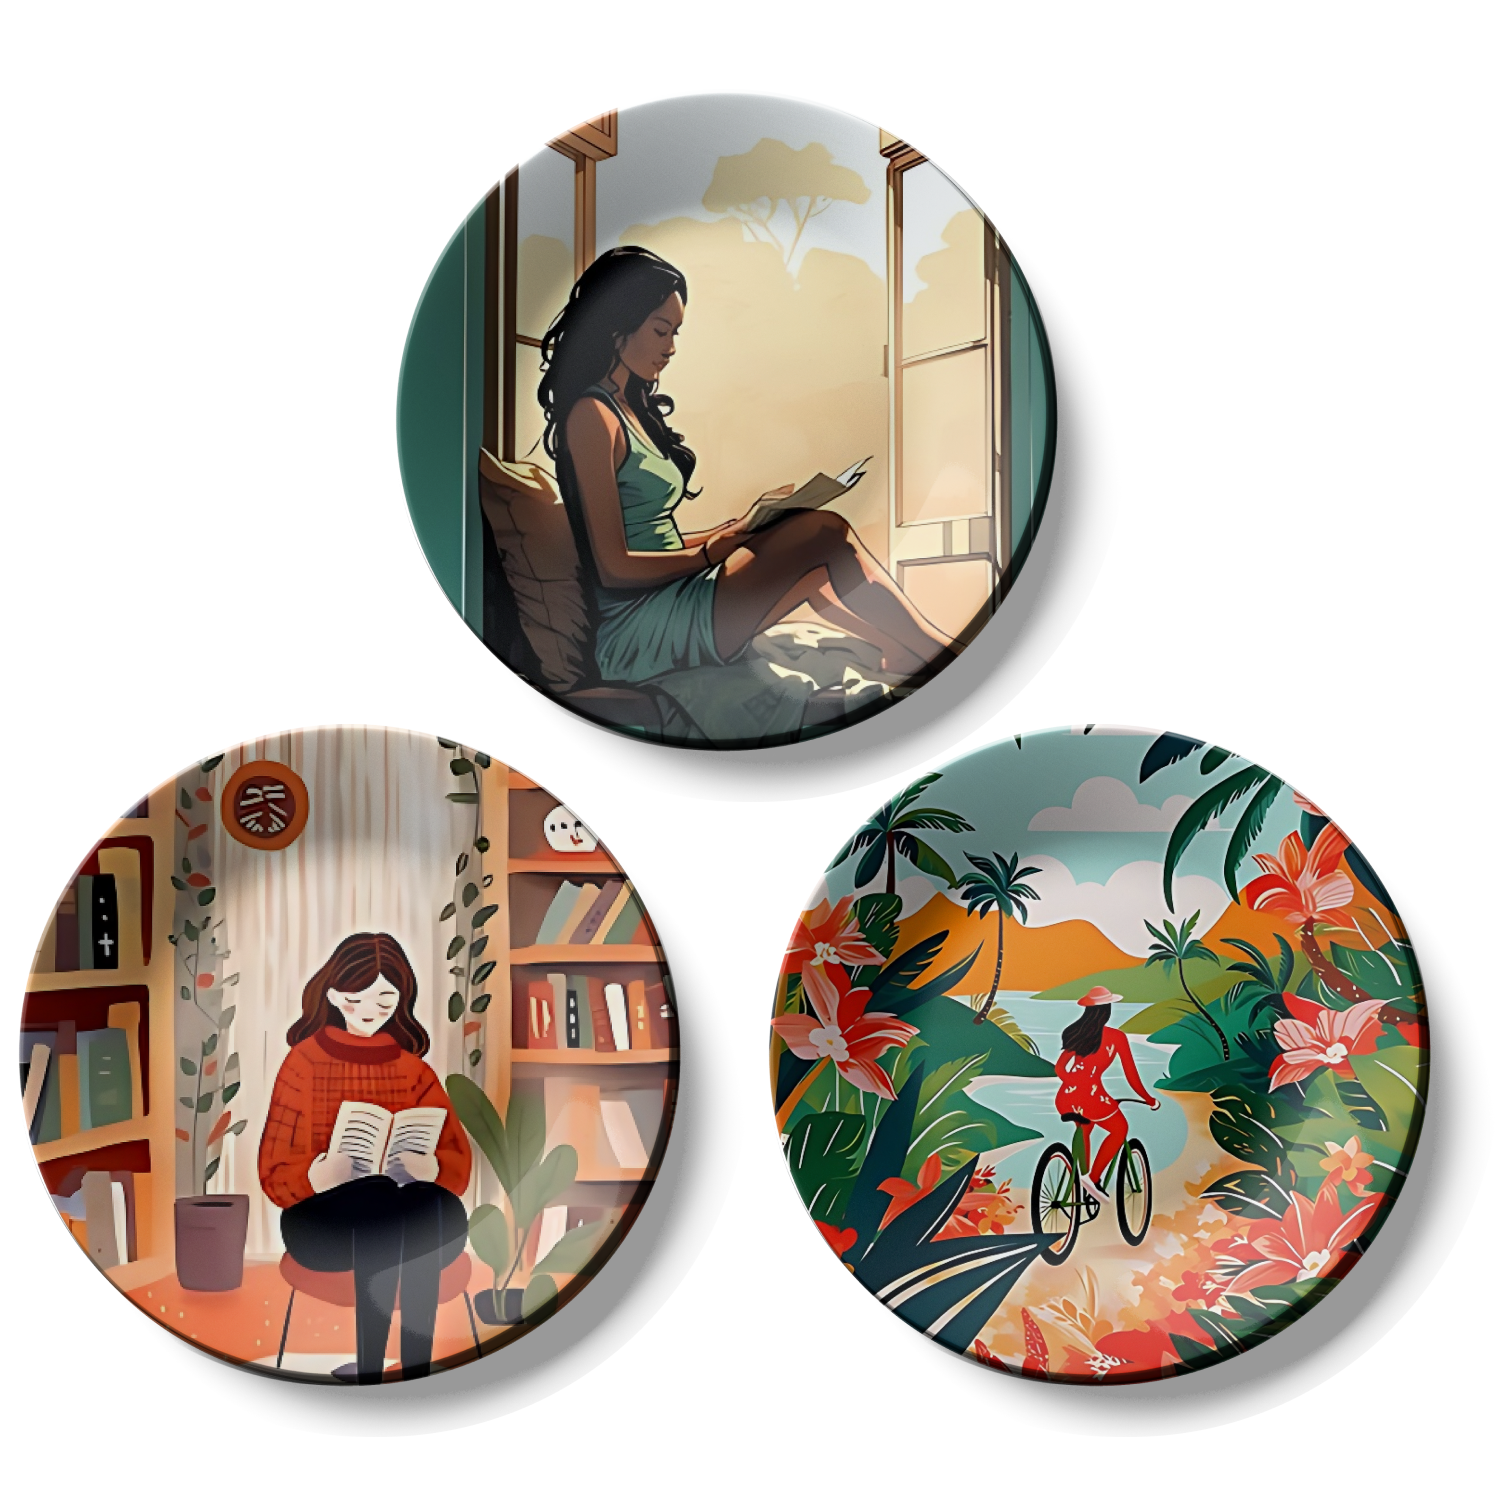 Artisanal Women Theme Wall Plates Décor Collection for Elegant Home Styling